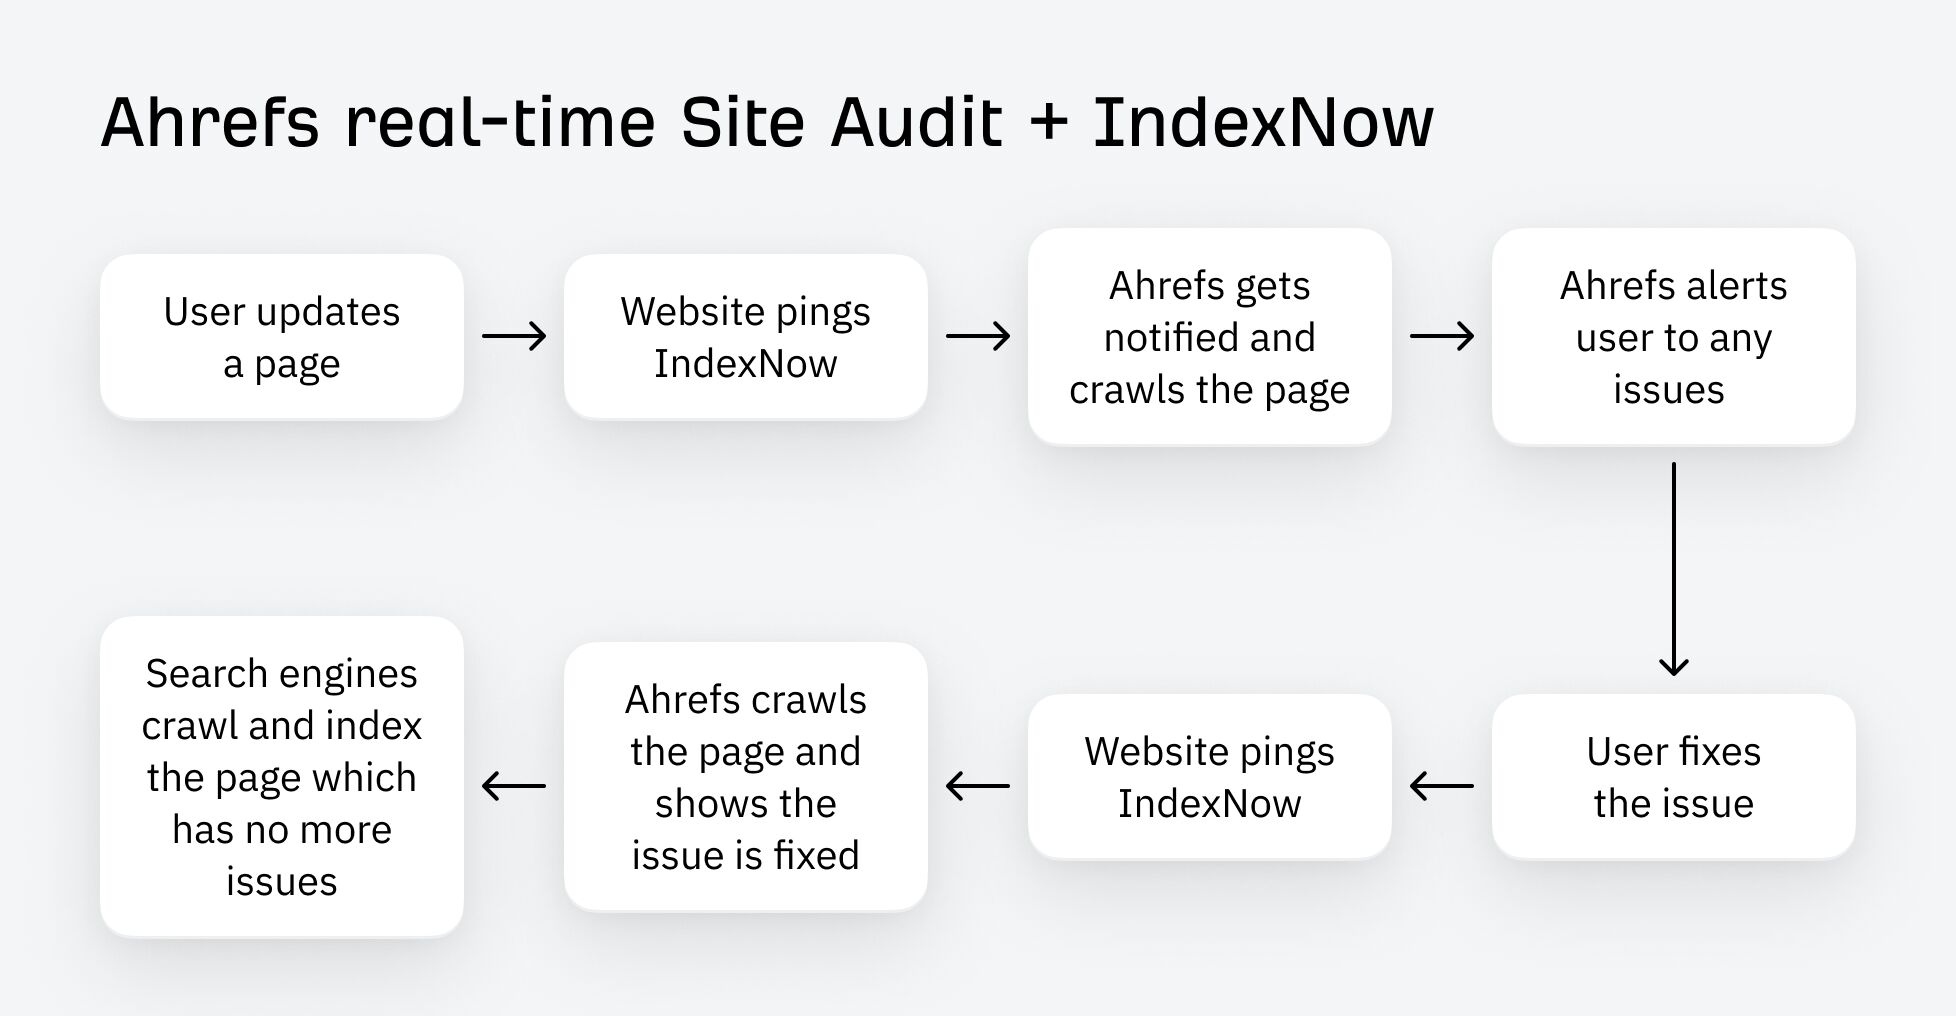 ahrefs-real-time-site-audit-and-indexnow-make-quic Quick SEO: 8 Ways to Accelerate SEO Results From Months to Days